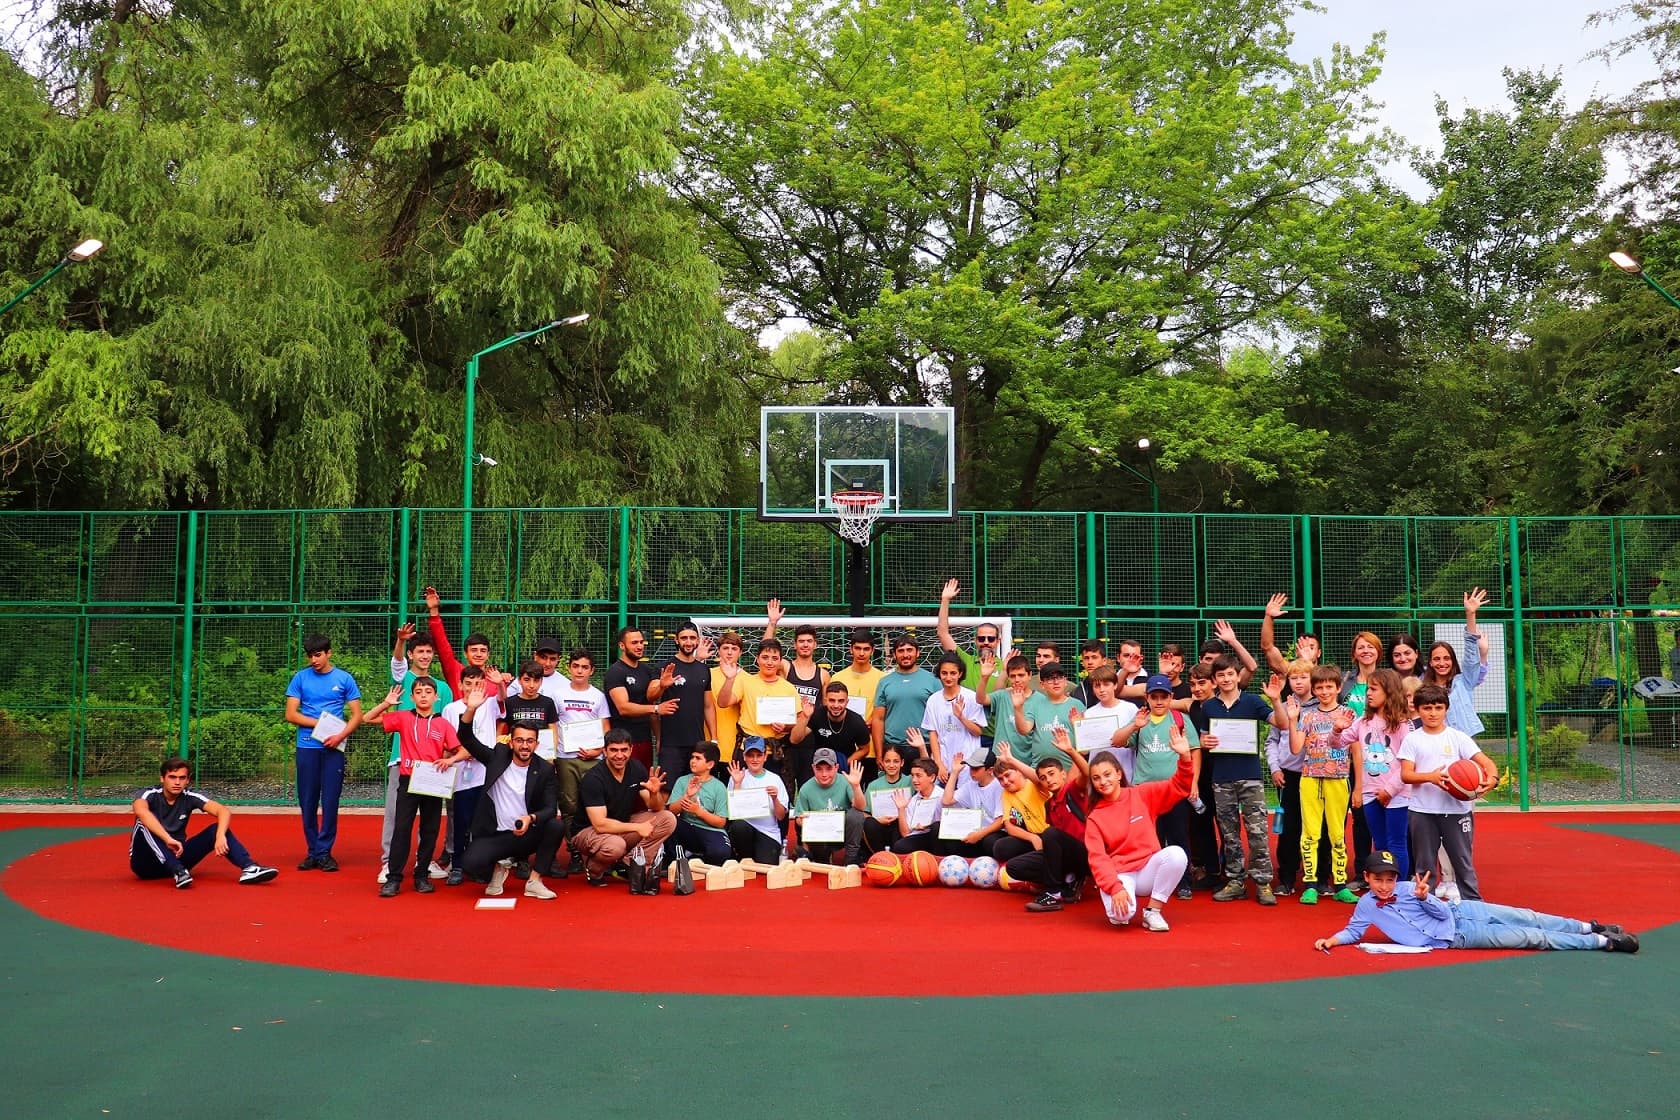 New multifunctional sports ground was opened in Dilijan City Park